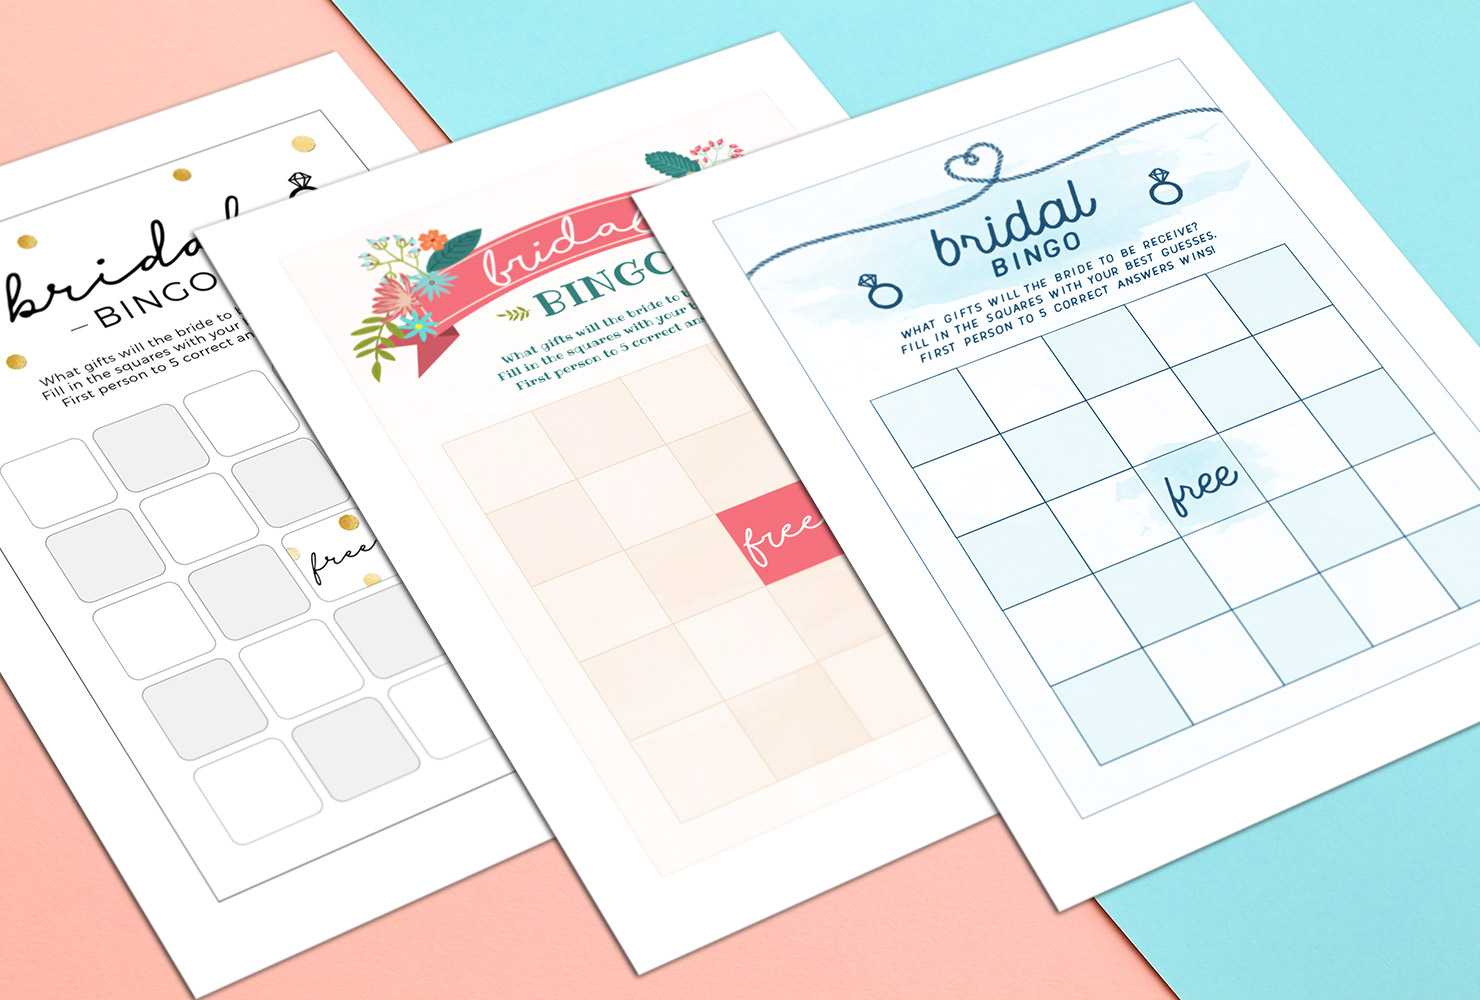 How To Play Bridal Shower Bingo (With Printables) | Shutterfly For Blank Bridal Shower Bingo Template